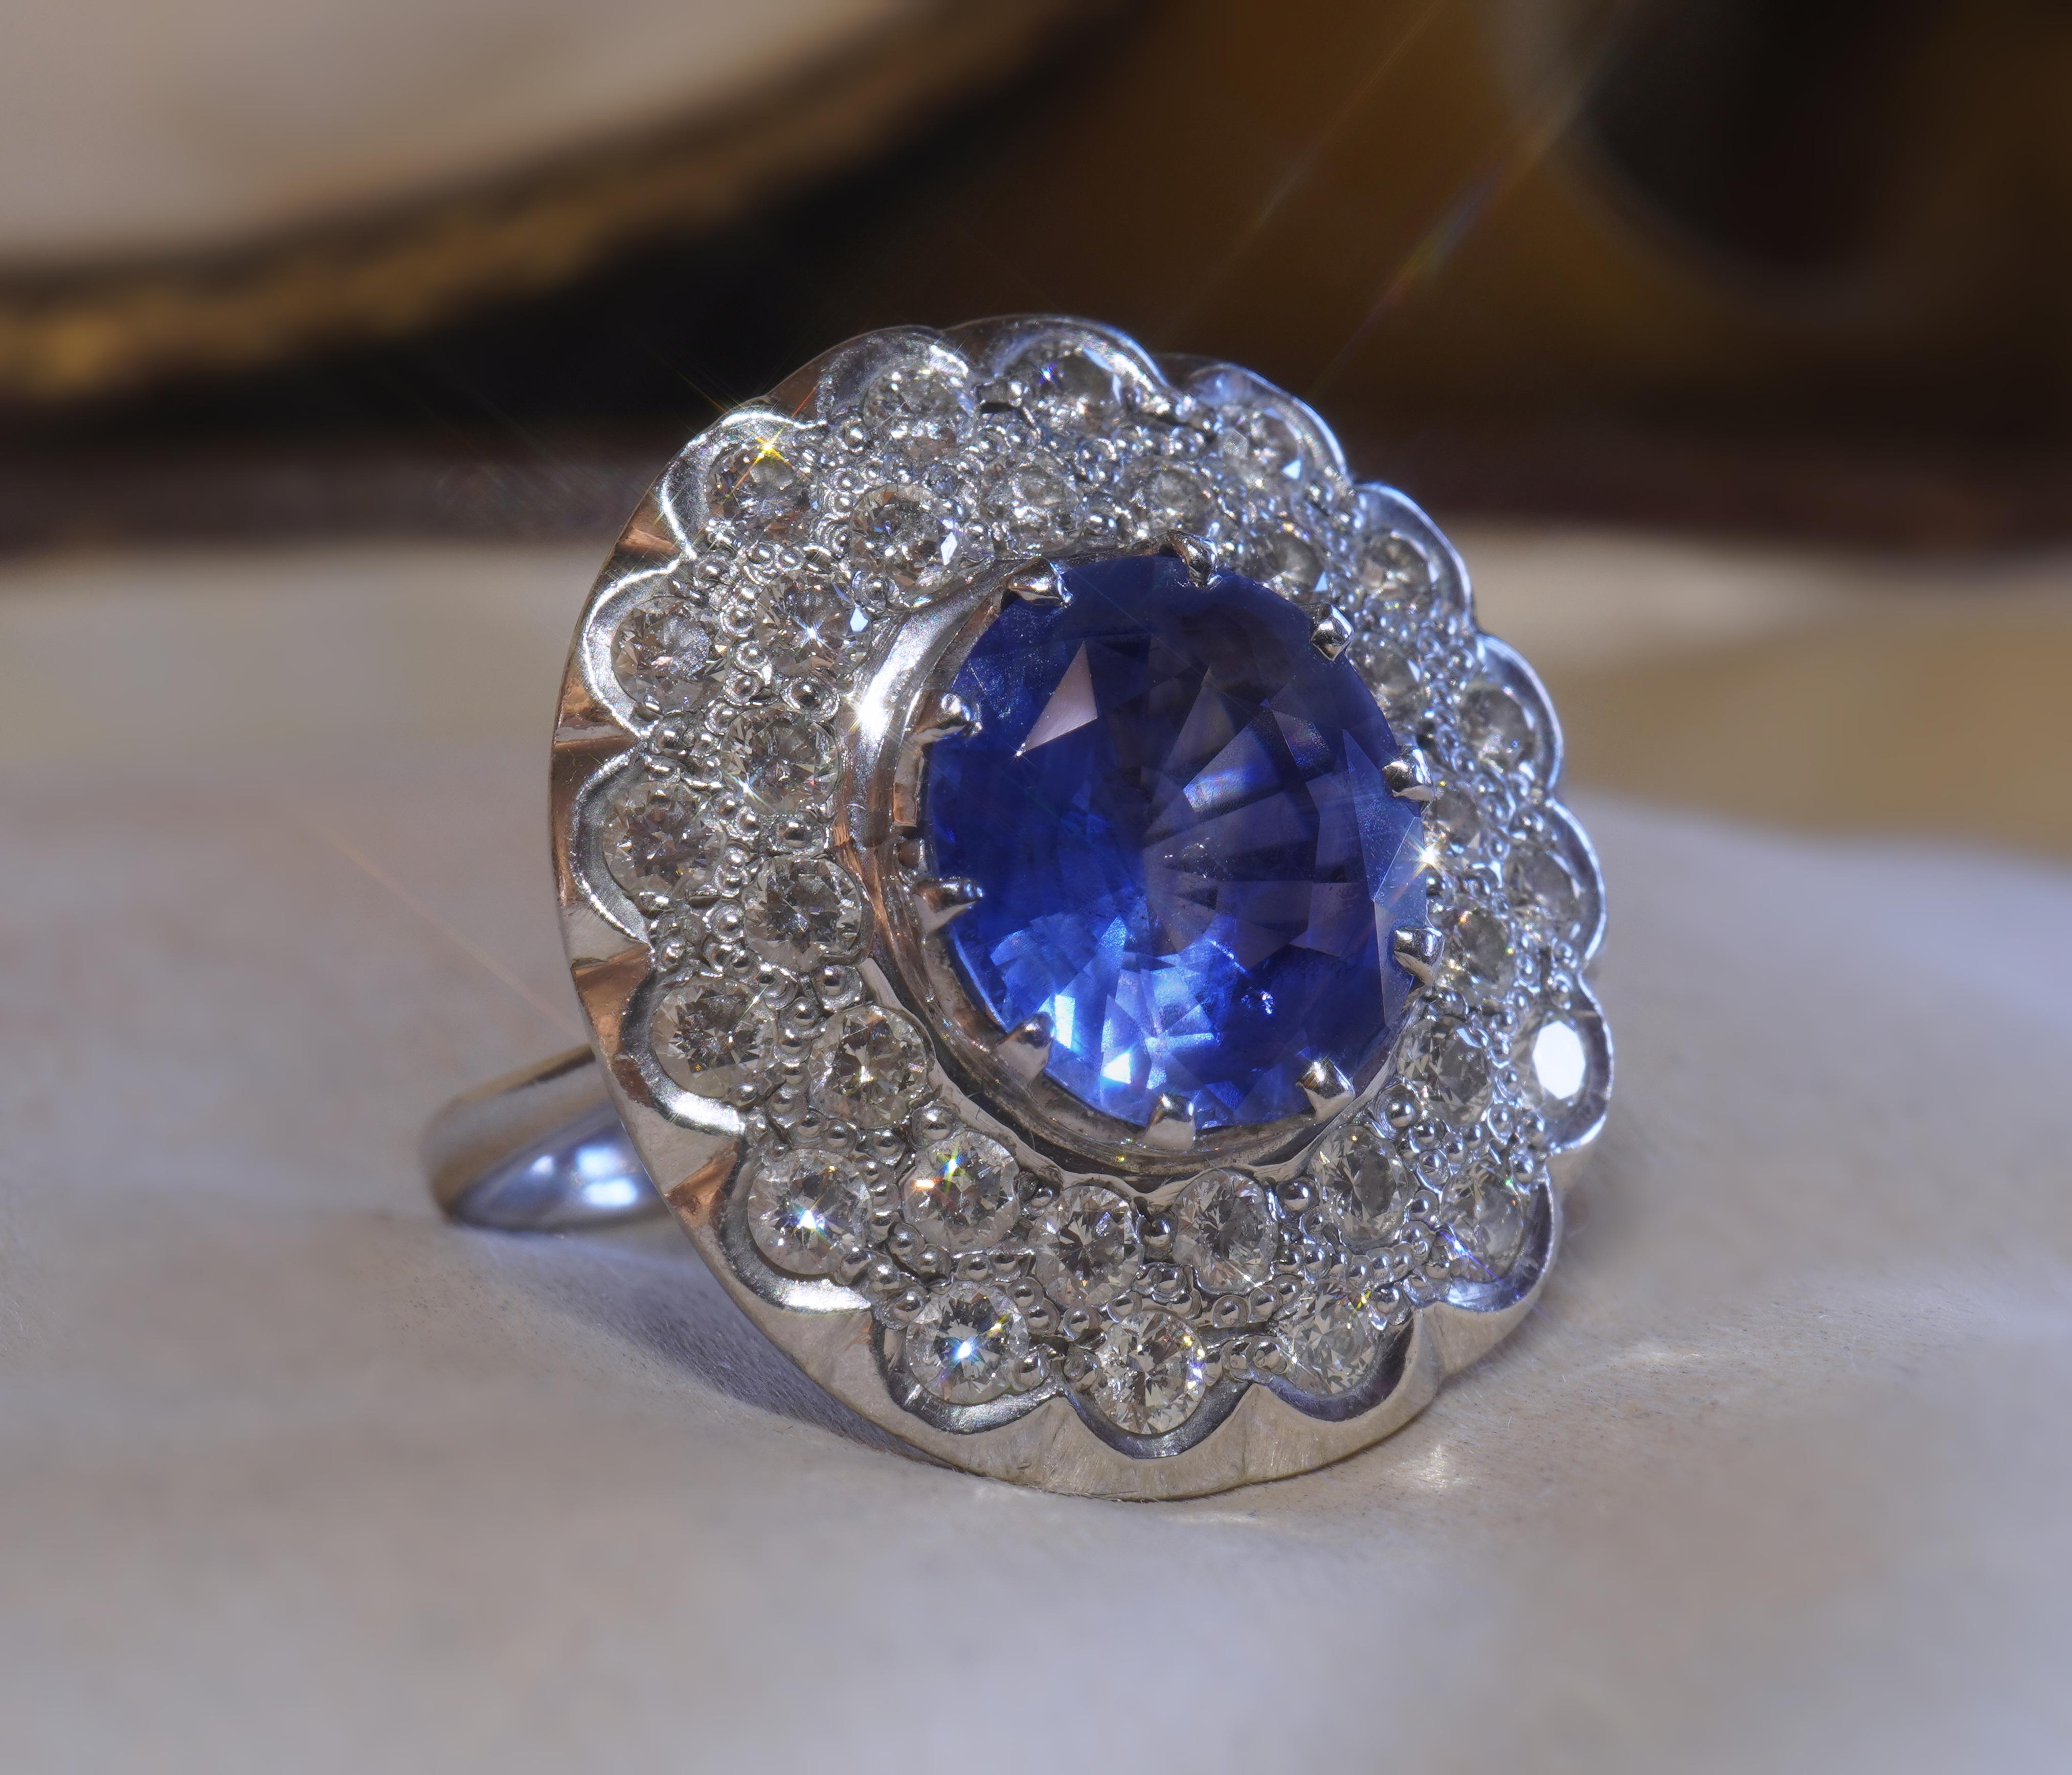 Old South Jewels proudly presents...VINTAGE LUXURY... GIA CERTIFIED PLATINUM 9.17 CARAT UNHEATED SAPPHIRE DIAMOND VINTAGE RING AND BOX.   7.53 CARAT TRANSPARENT BLUE GIA CERTIFIED RARE NO HEAT NATURAL CEYLON SAPPHIRE.   (This Gorgeous Vintage